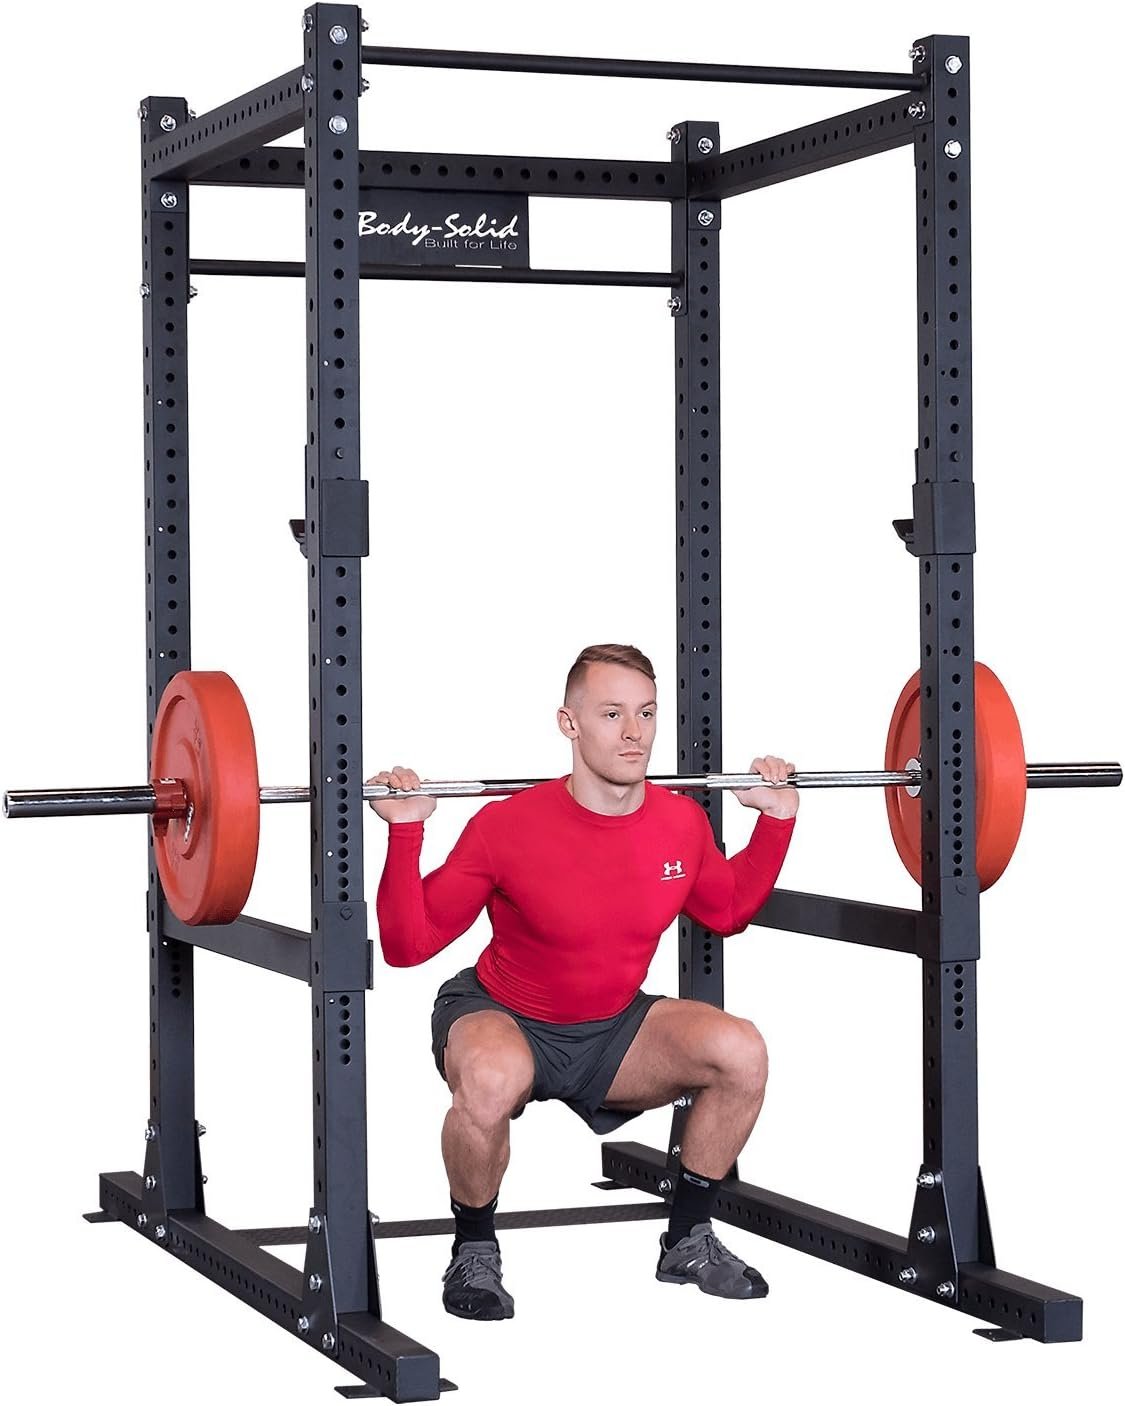 Body-Solid SPR1000 Commercial Power Rack Review